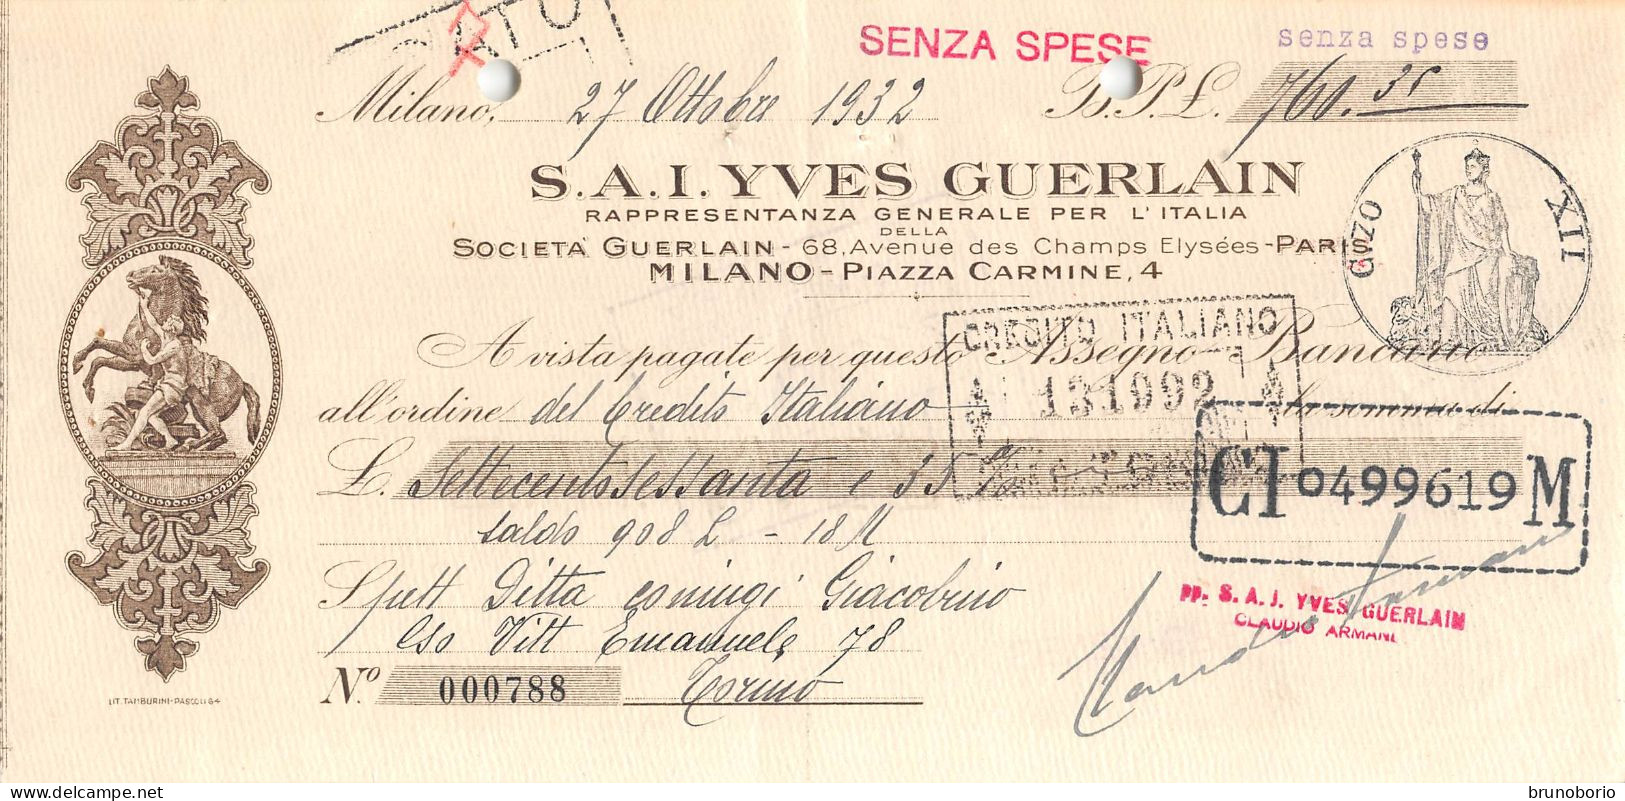 00156 "S.A.I. YVER GUERLAIN - PARIS - DITTA GIACOBINO . TORINO . CAMBIALE NR 000788 - MILANO 1932"  CAMBIALE ORIG - Wechsel